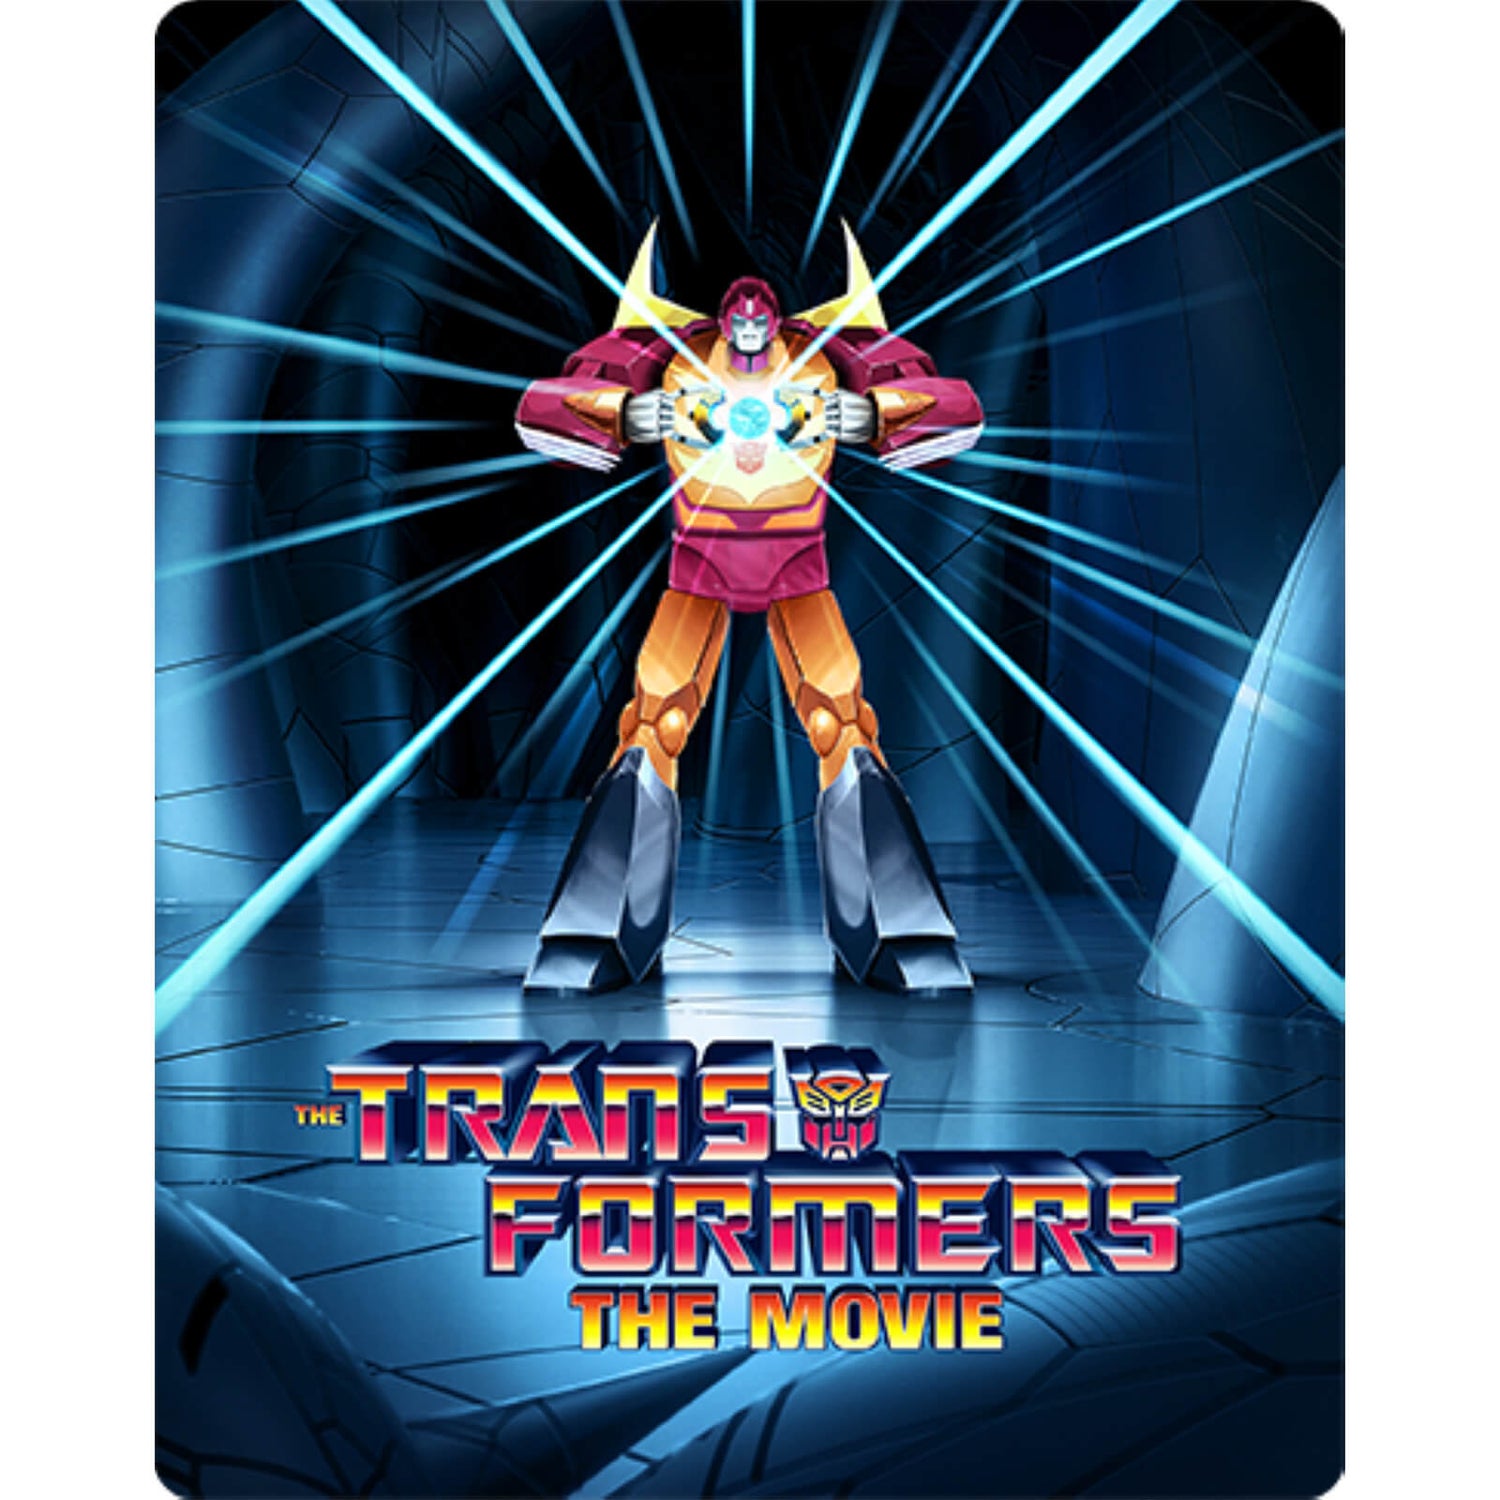 The Transformers: The Movie -35th Anniversary Limited Edition 4K Ultra HD Steelbook (Includes Blu-ray)